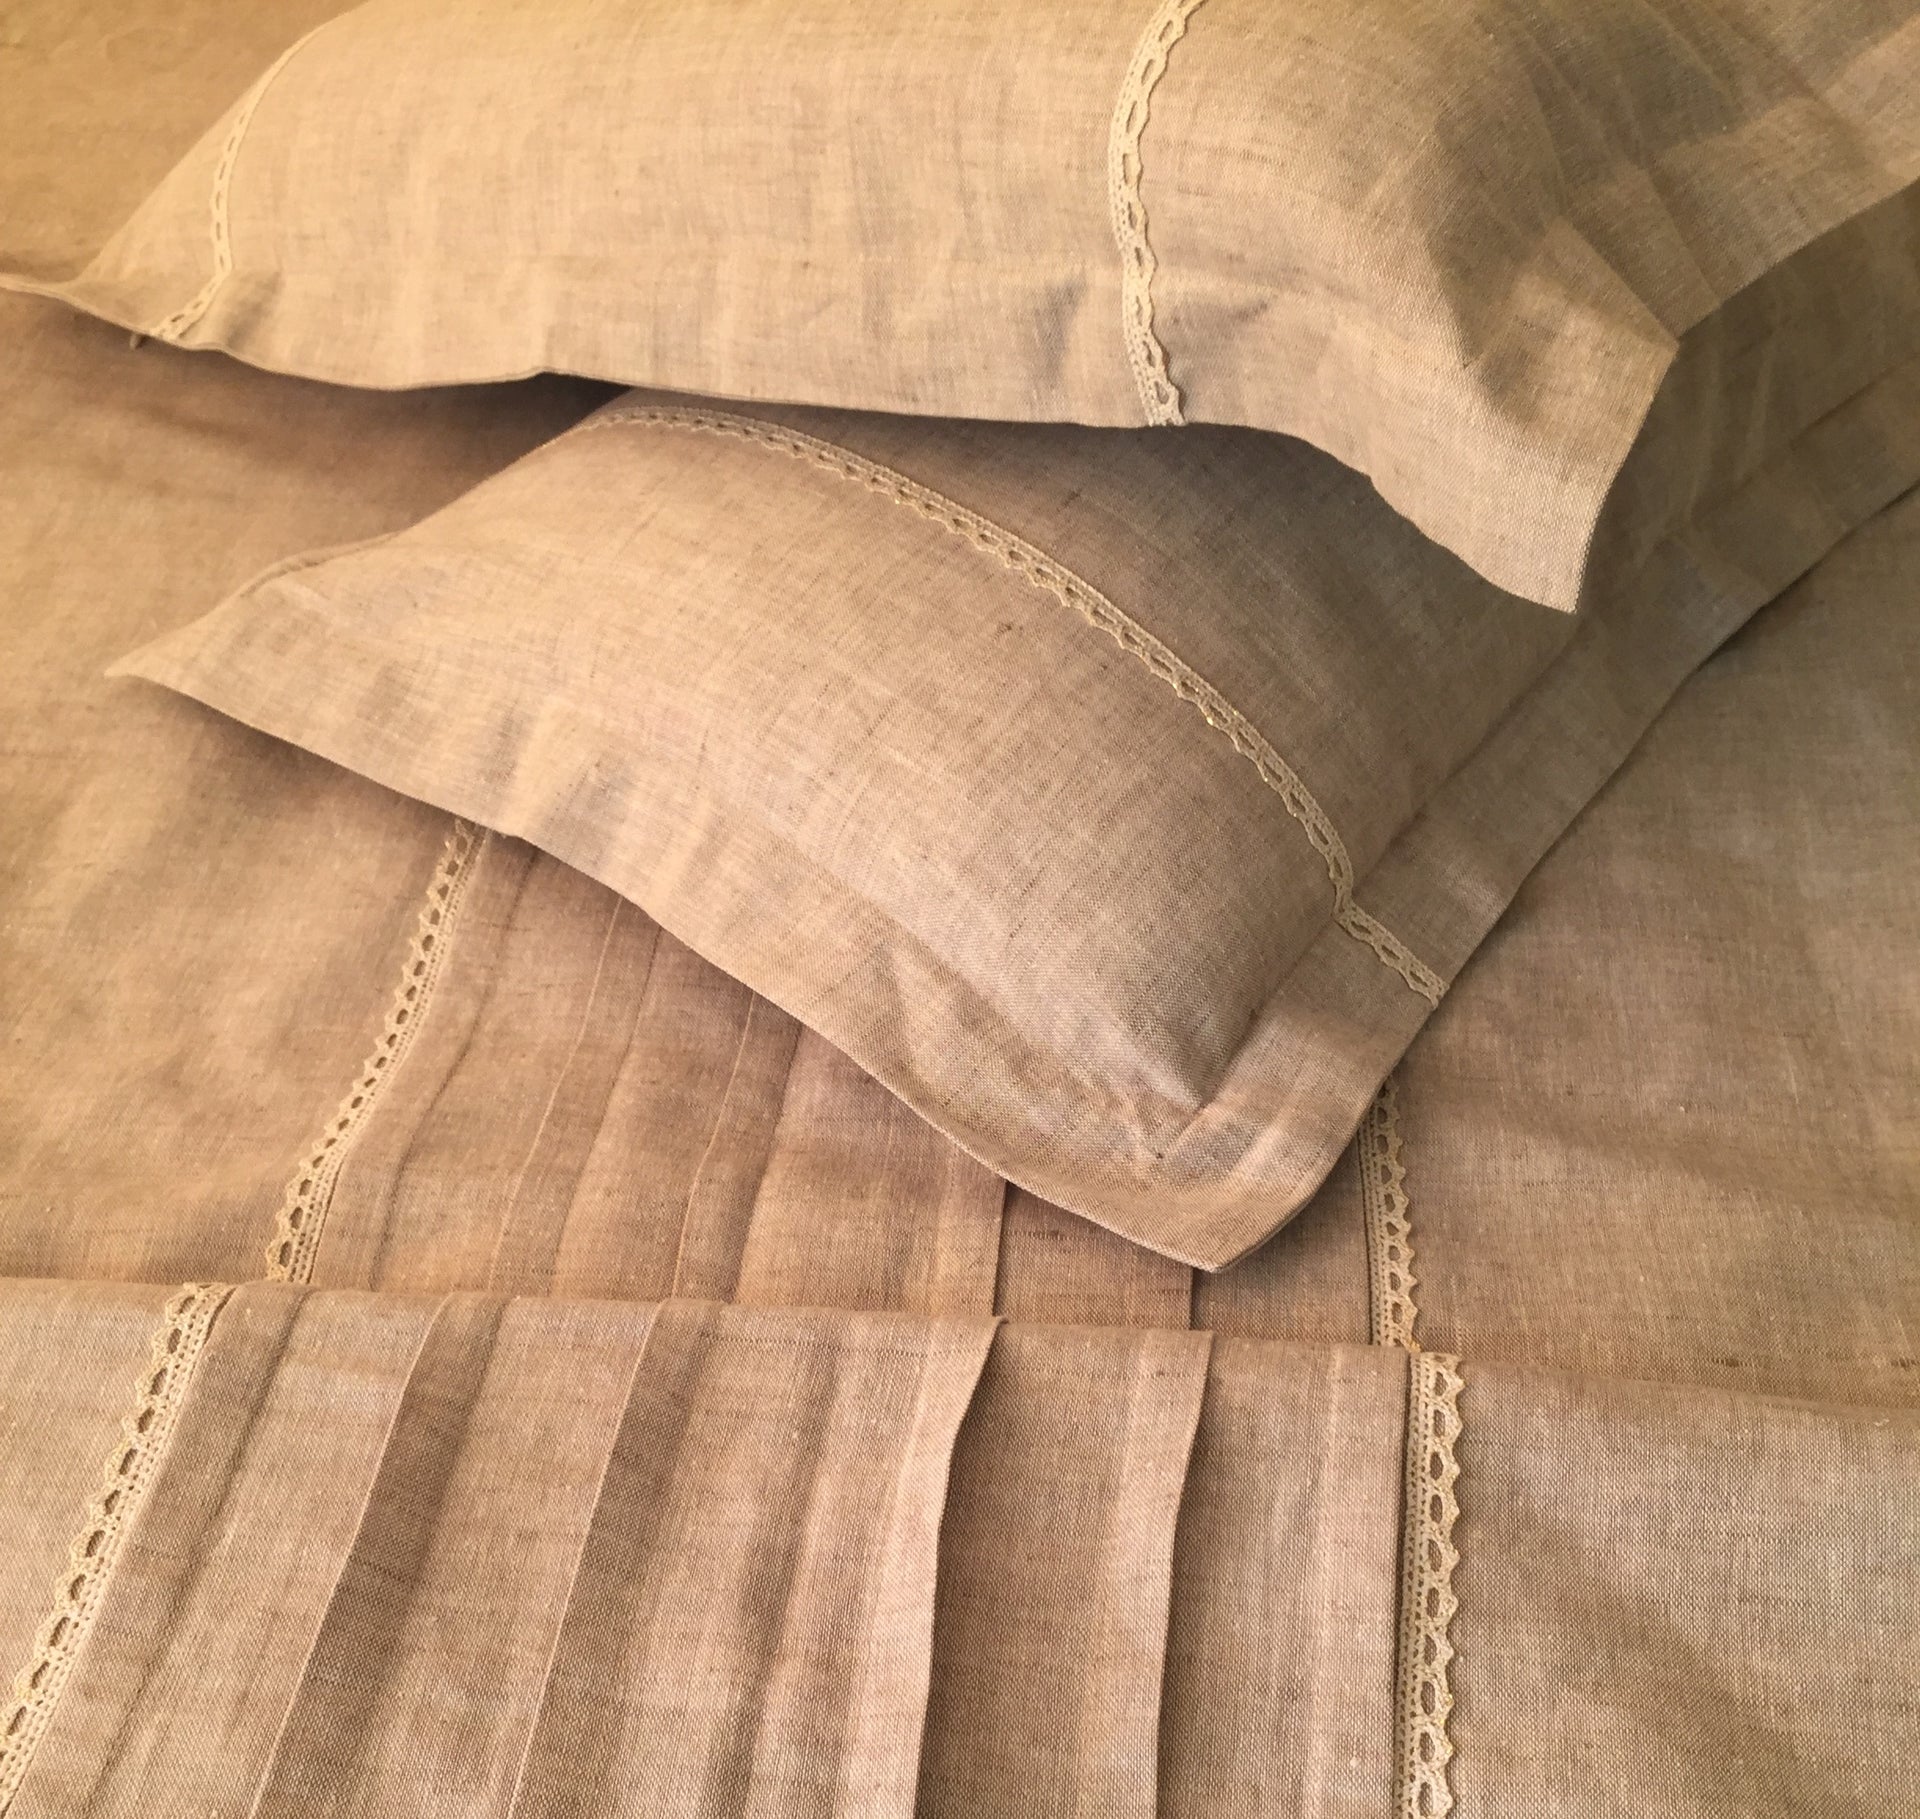 Linen Duvet Cover with Pleats and Lace